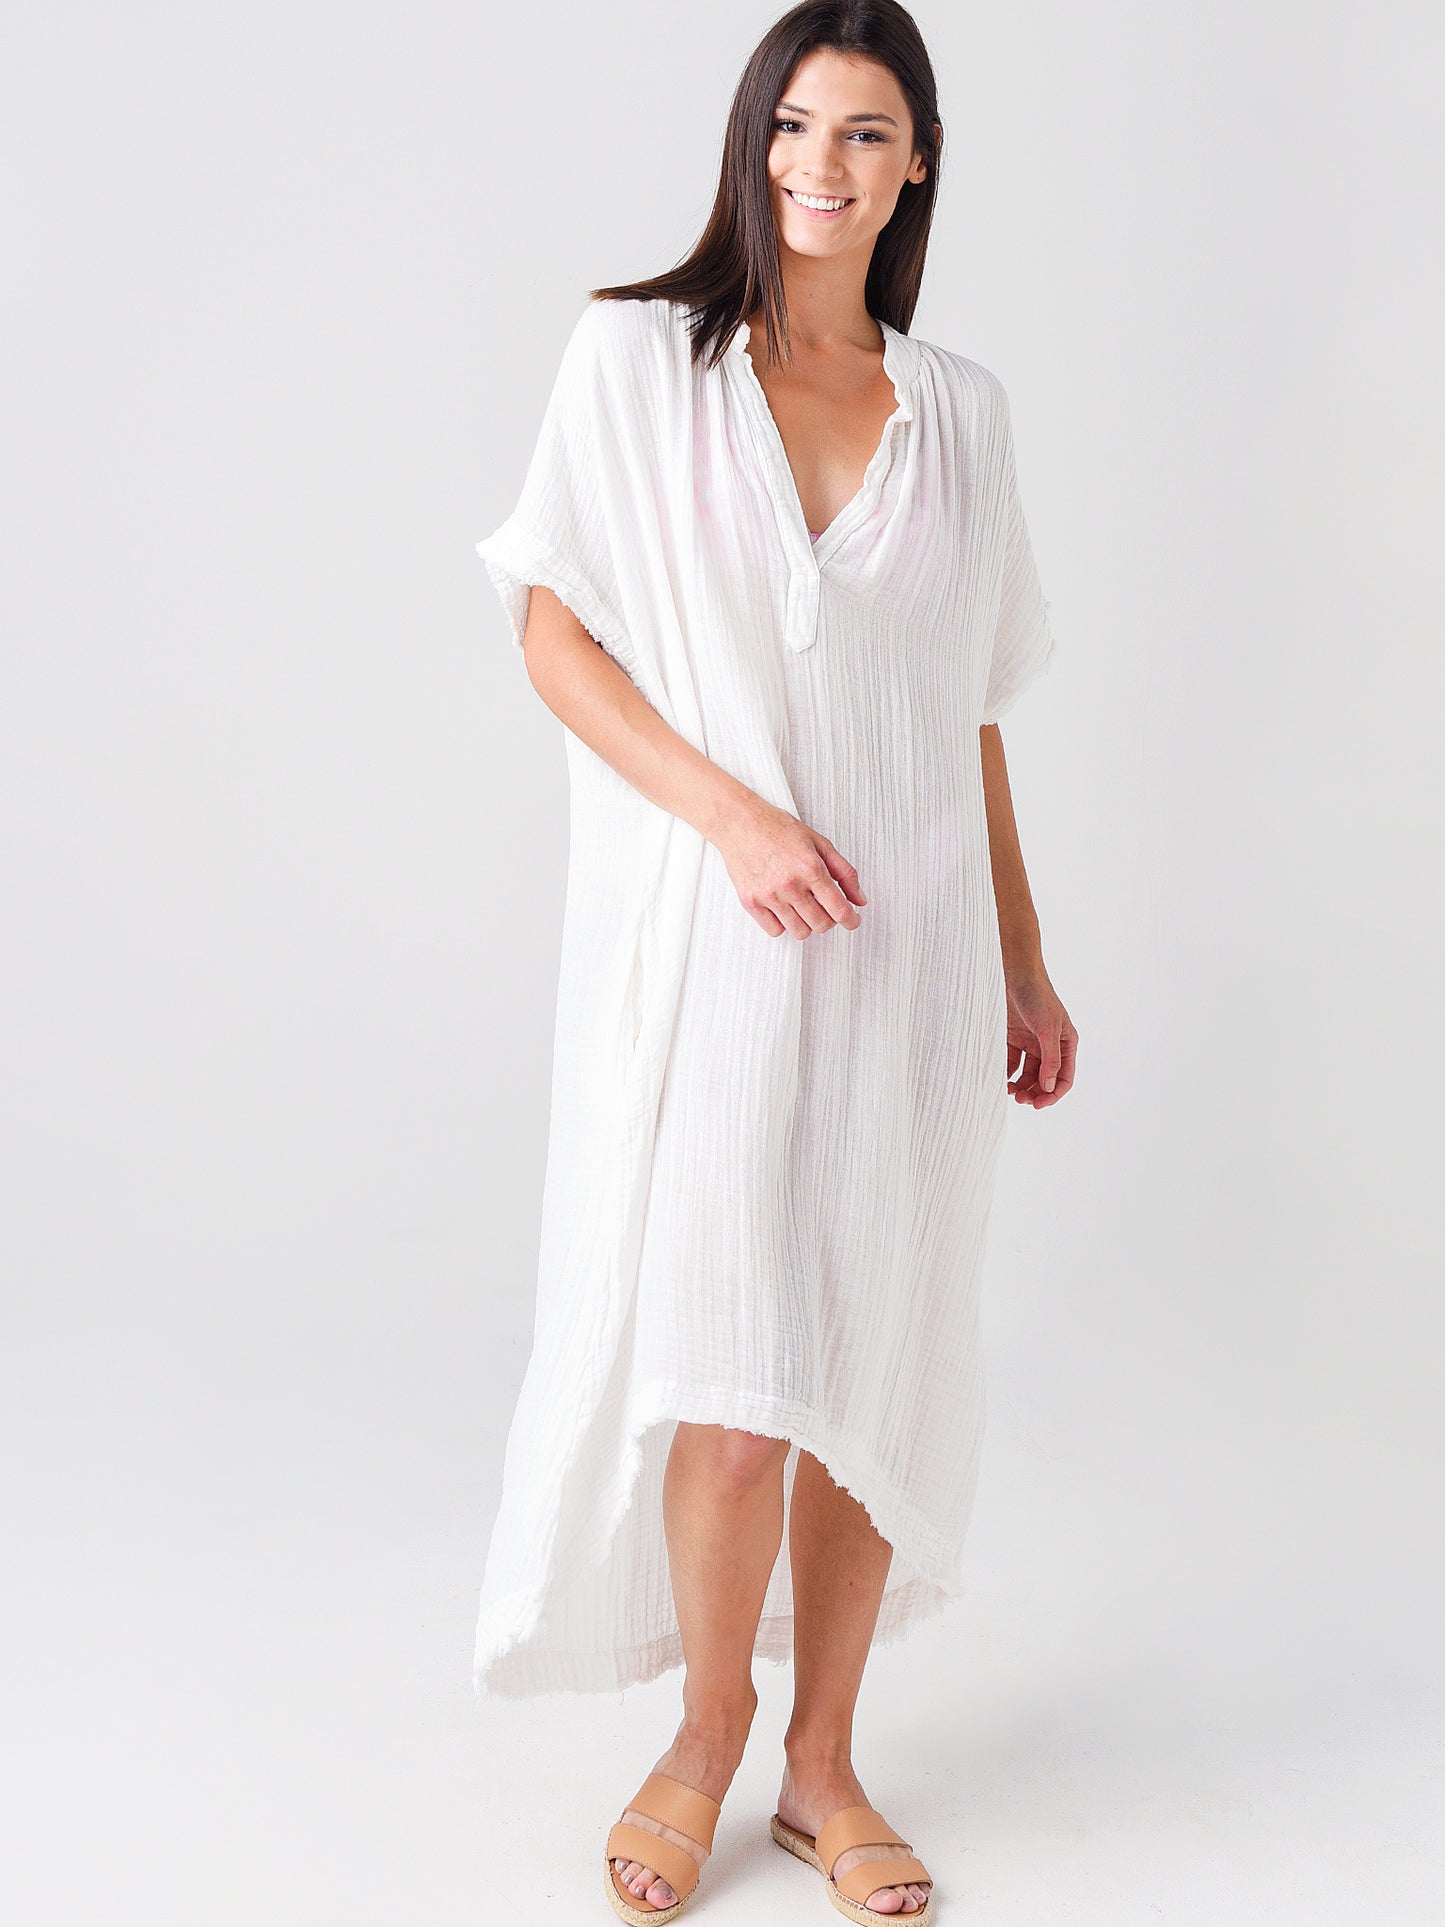 9Seed Women's Tunisia Caftan Cover-Up